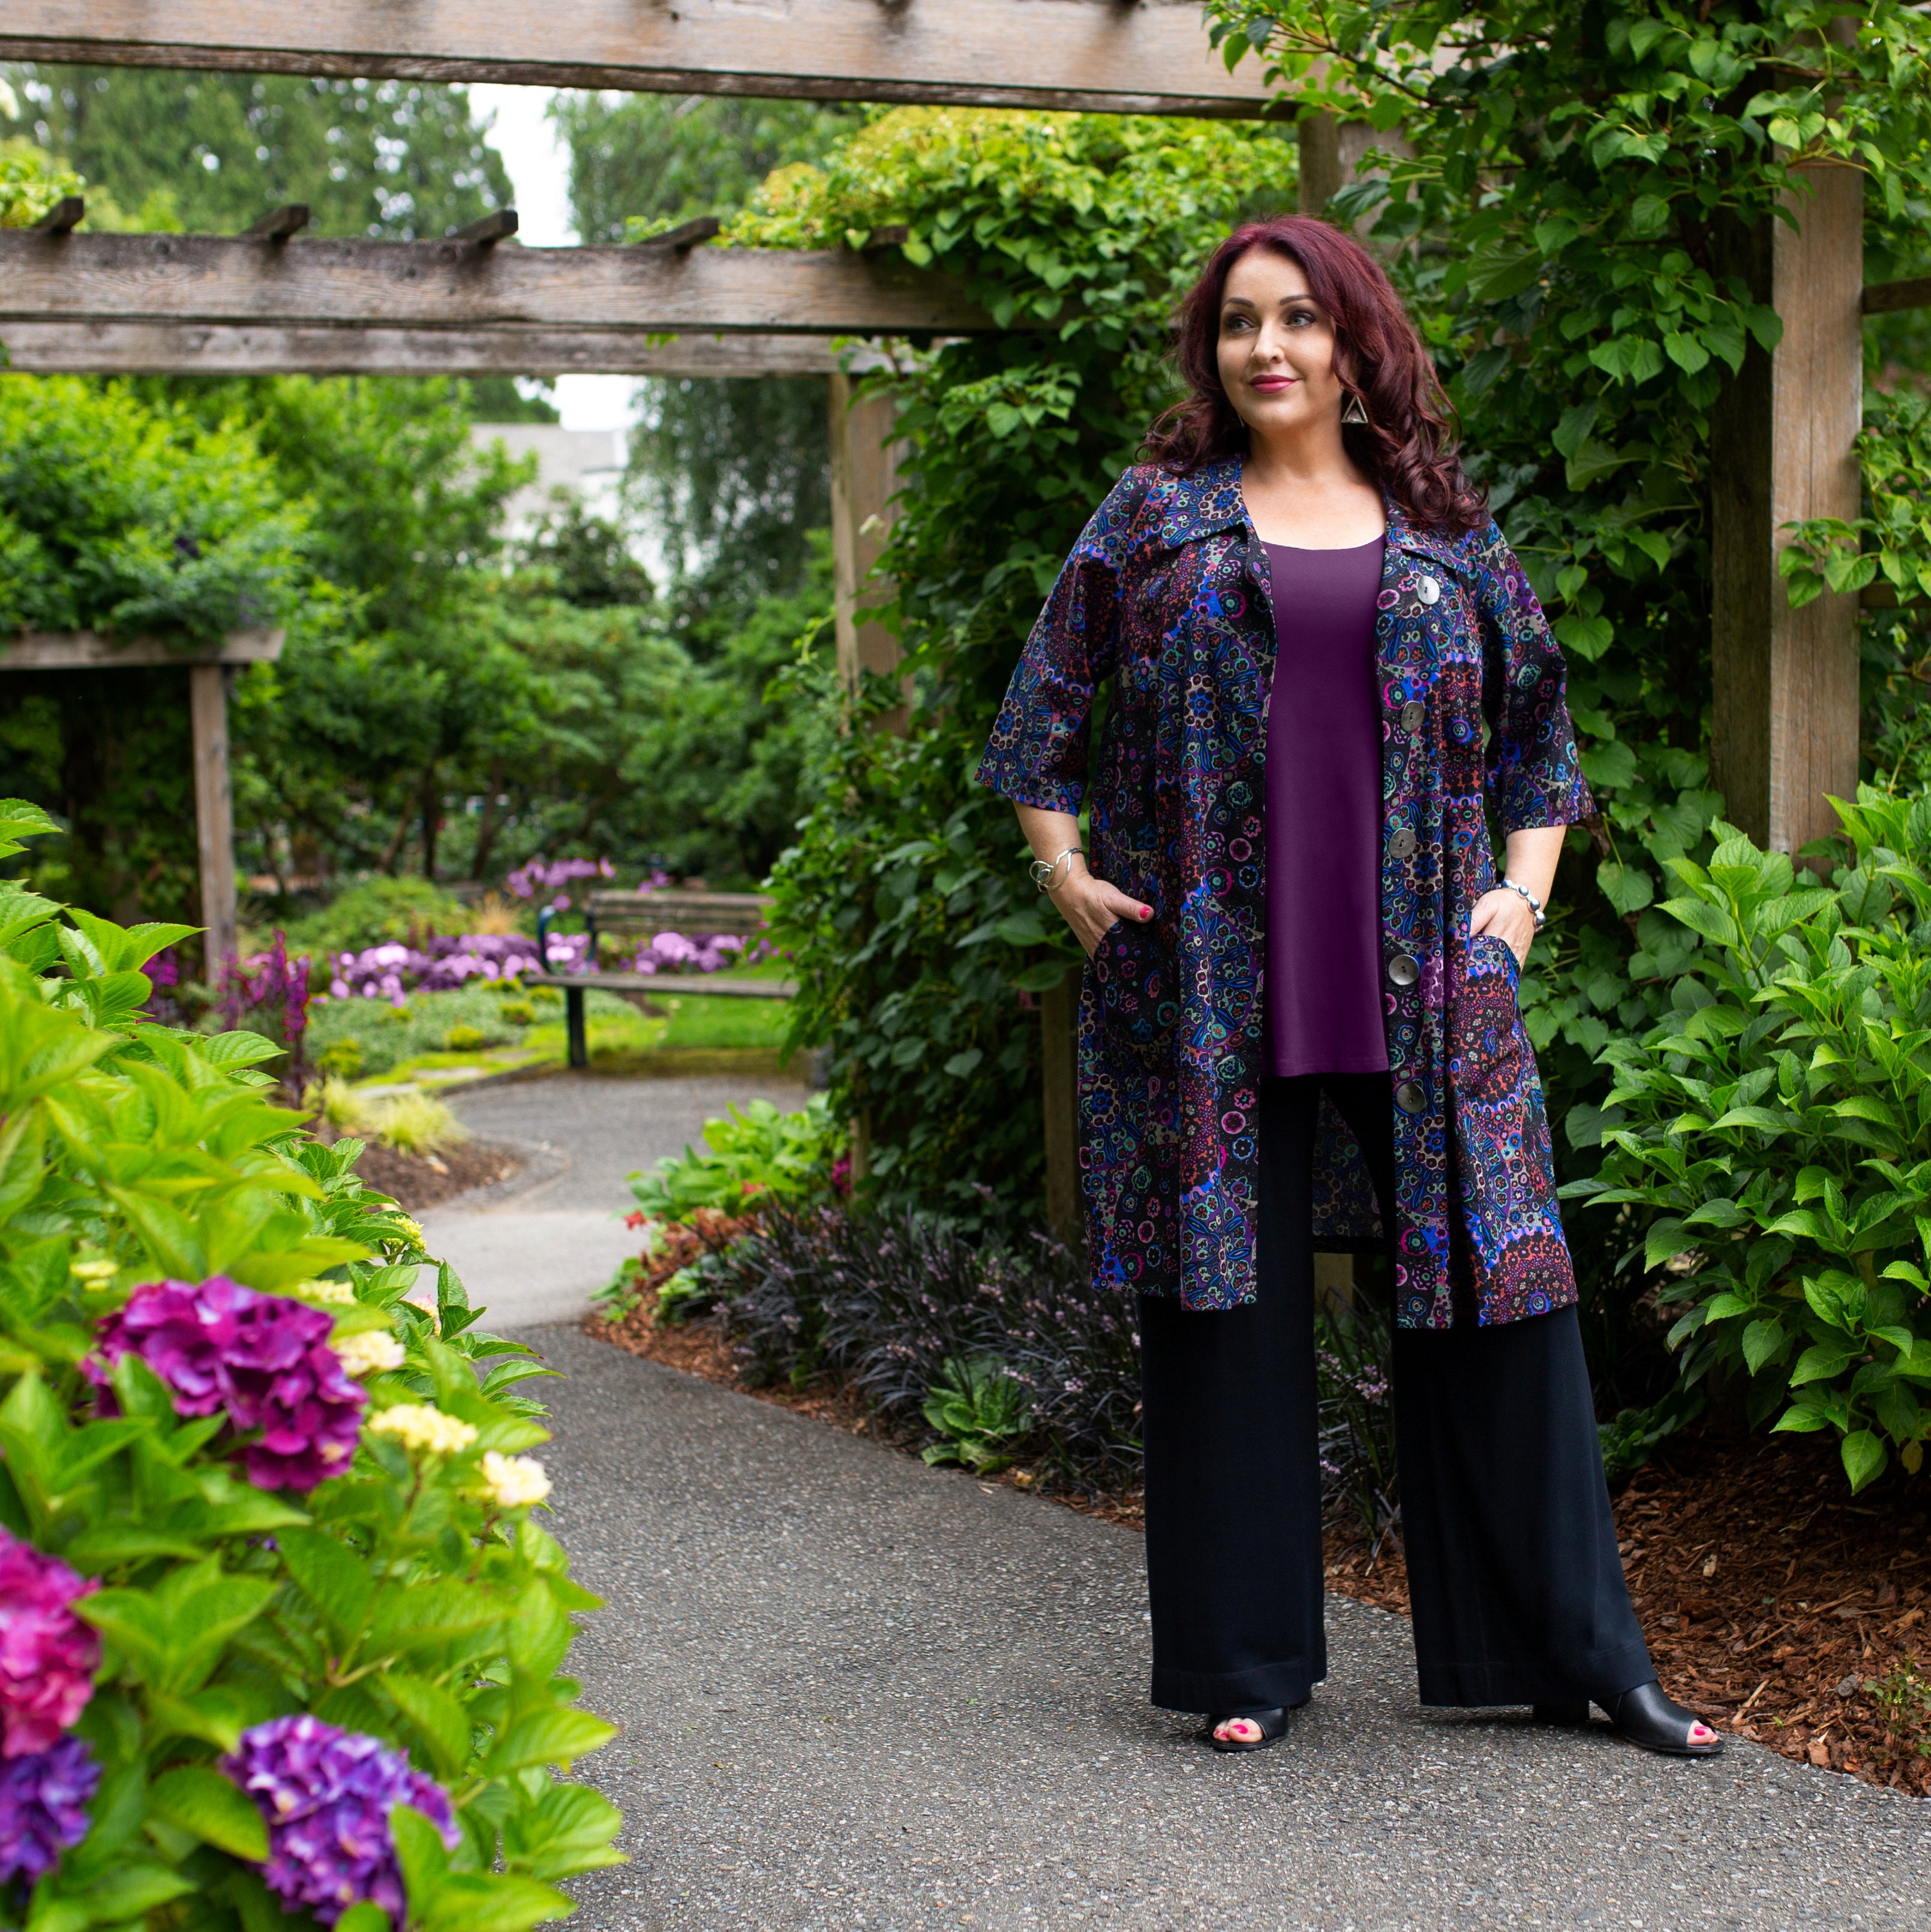 Diane Kennedy's Rhapsody coat styled over a purple tee tunic and black pants